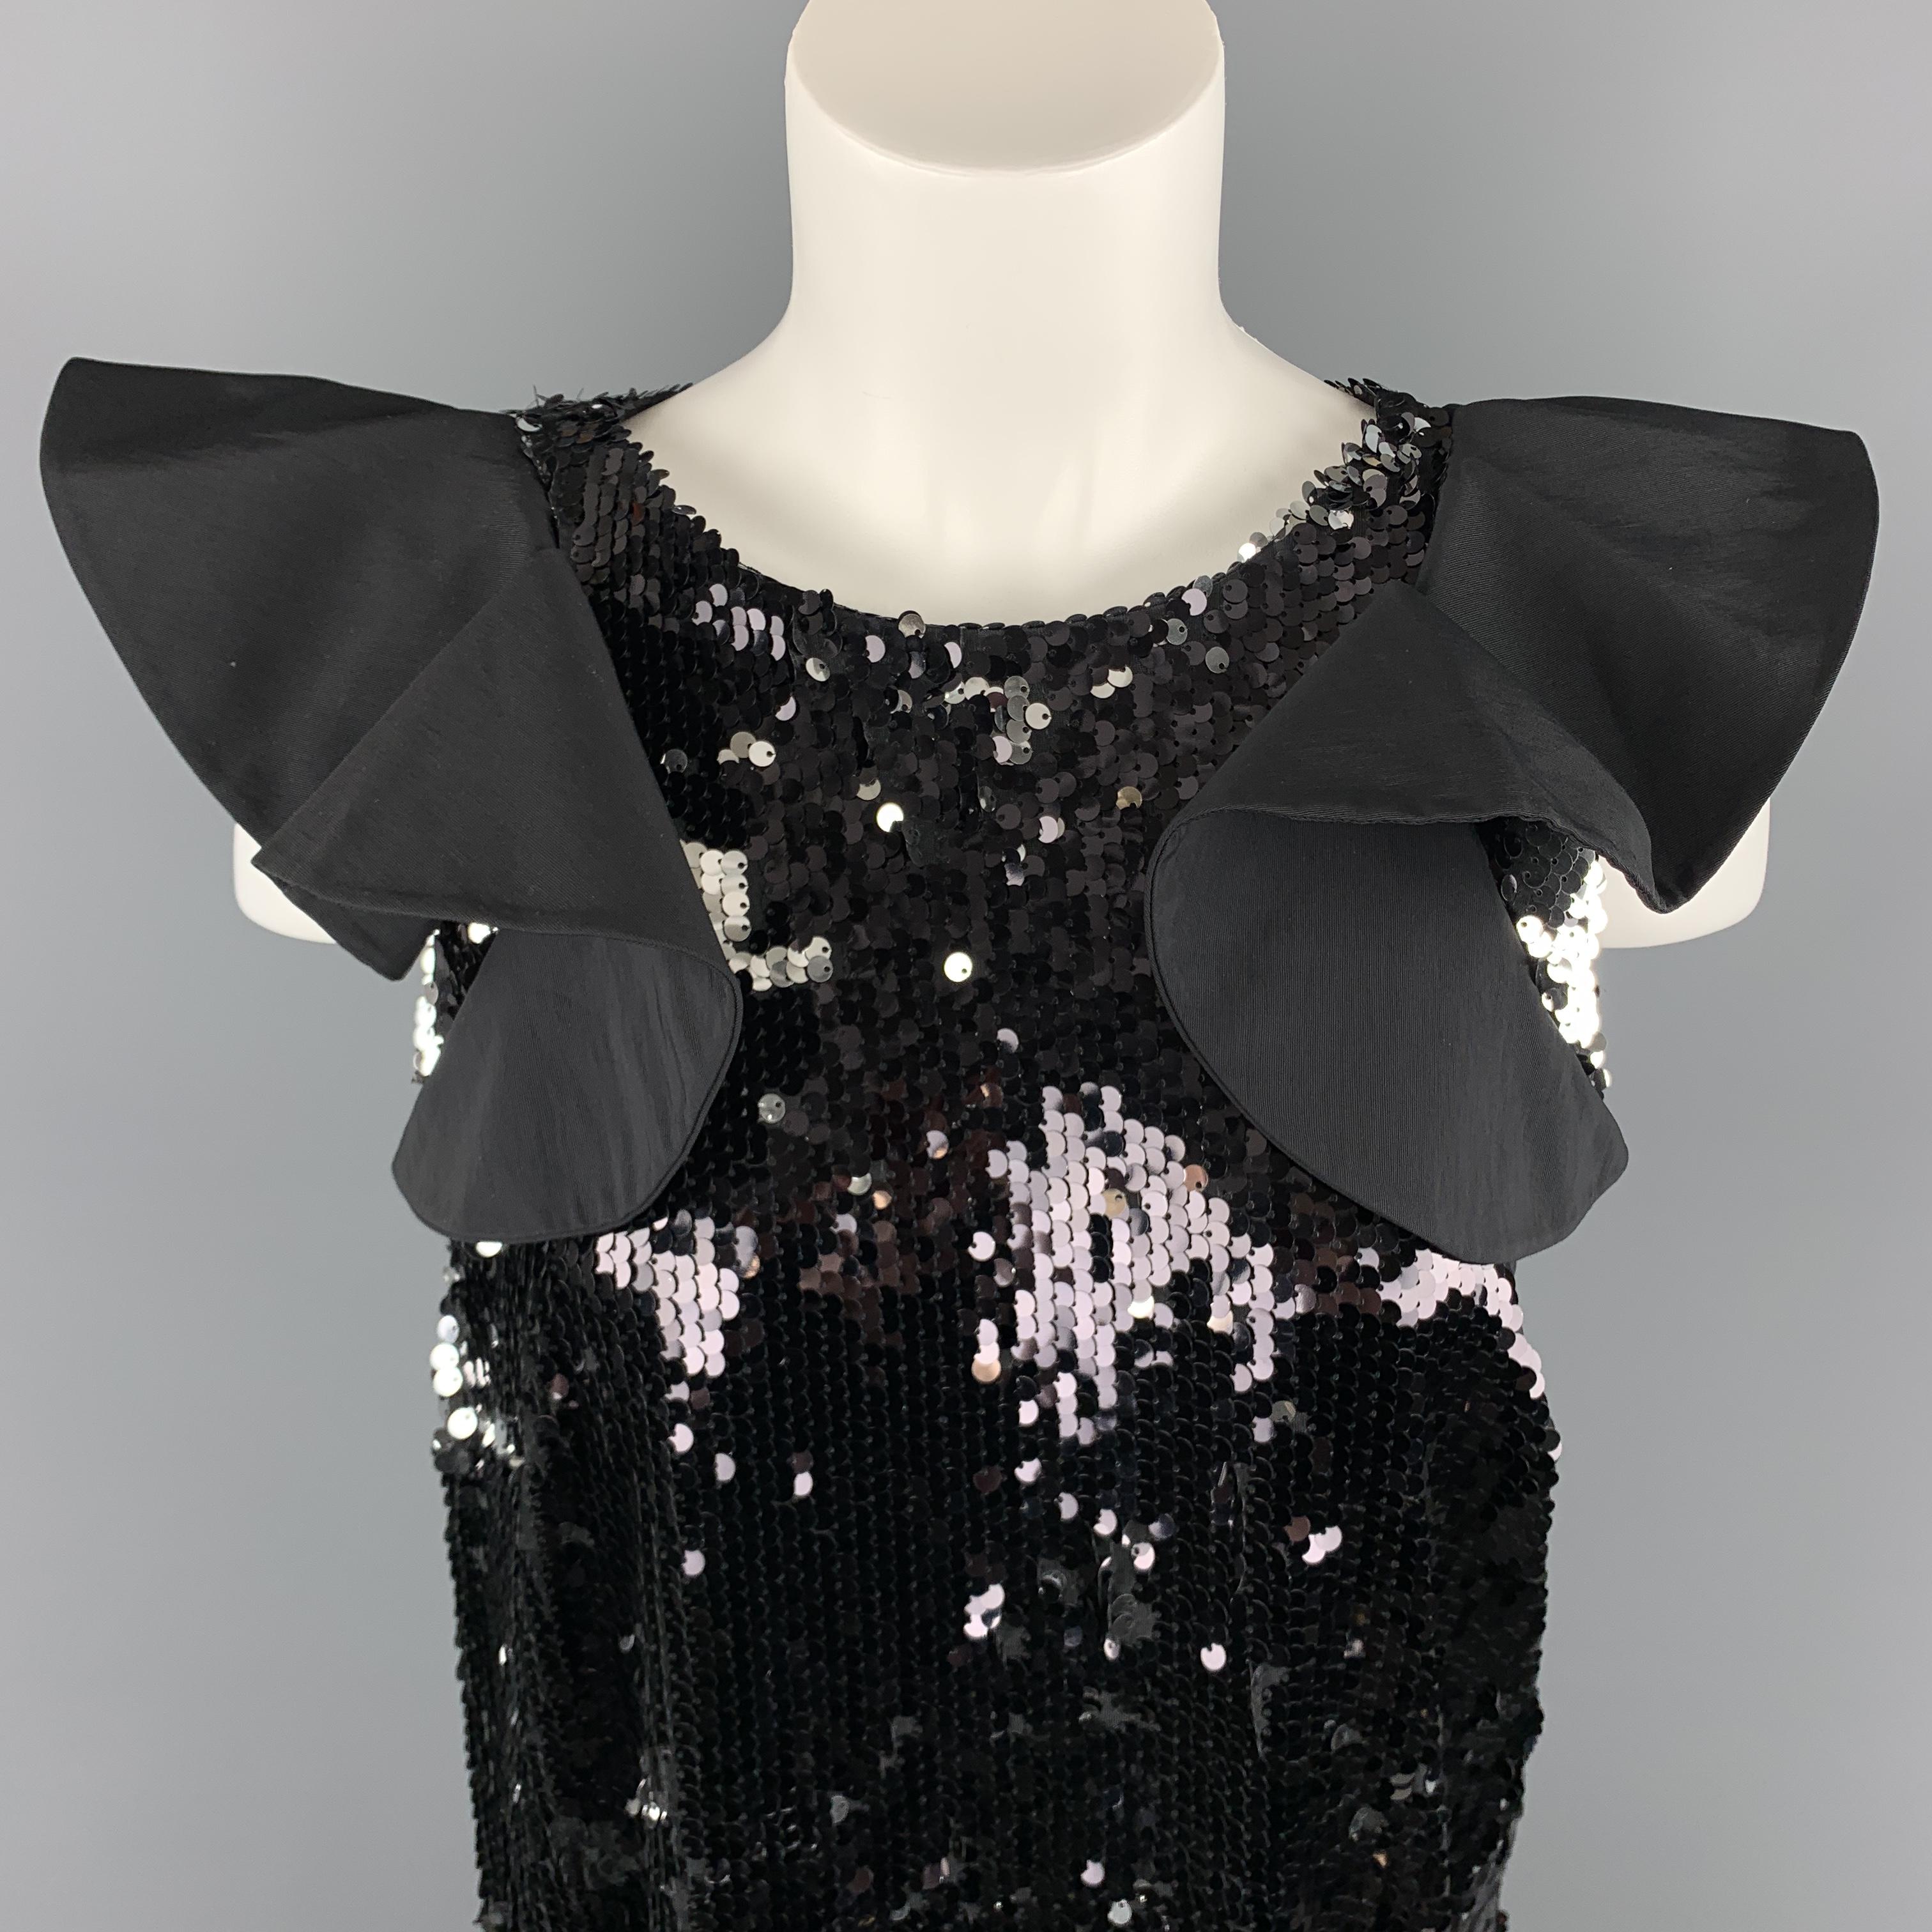 ROMAN cocktail dress comes in black and silver reverse sequin fabric with ruffled shoulders and an A line silhouette. 

Excellent Pre-Owned Condition.
Marked: 8

Measurements:

Shoulder: 18 in.
Bust: 42 in.
Waist: 42 in.
Hip: 46 in.
Length: 35 in.